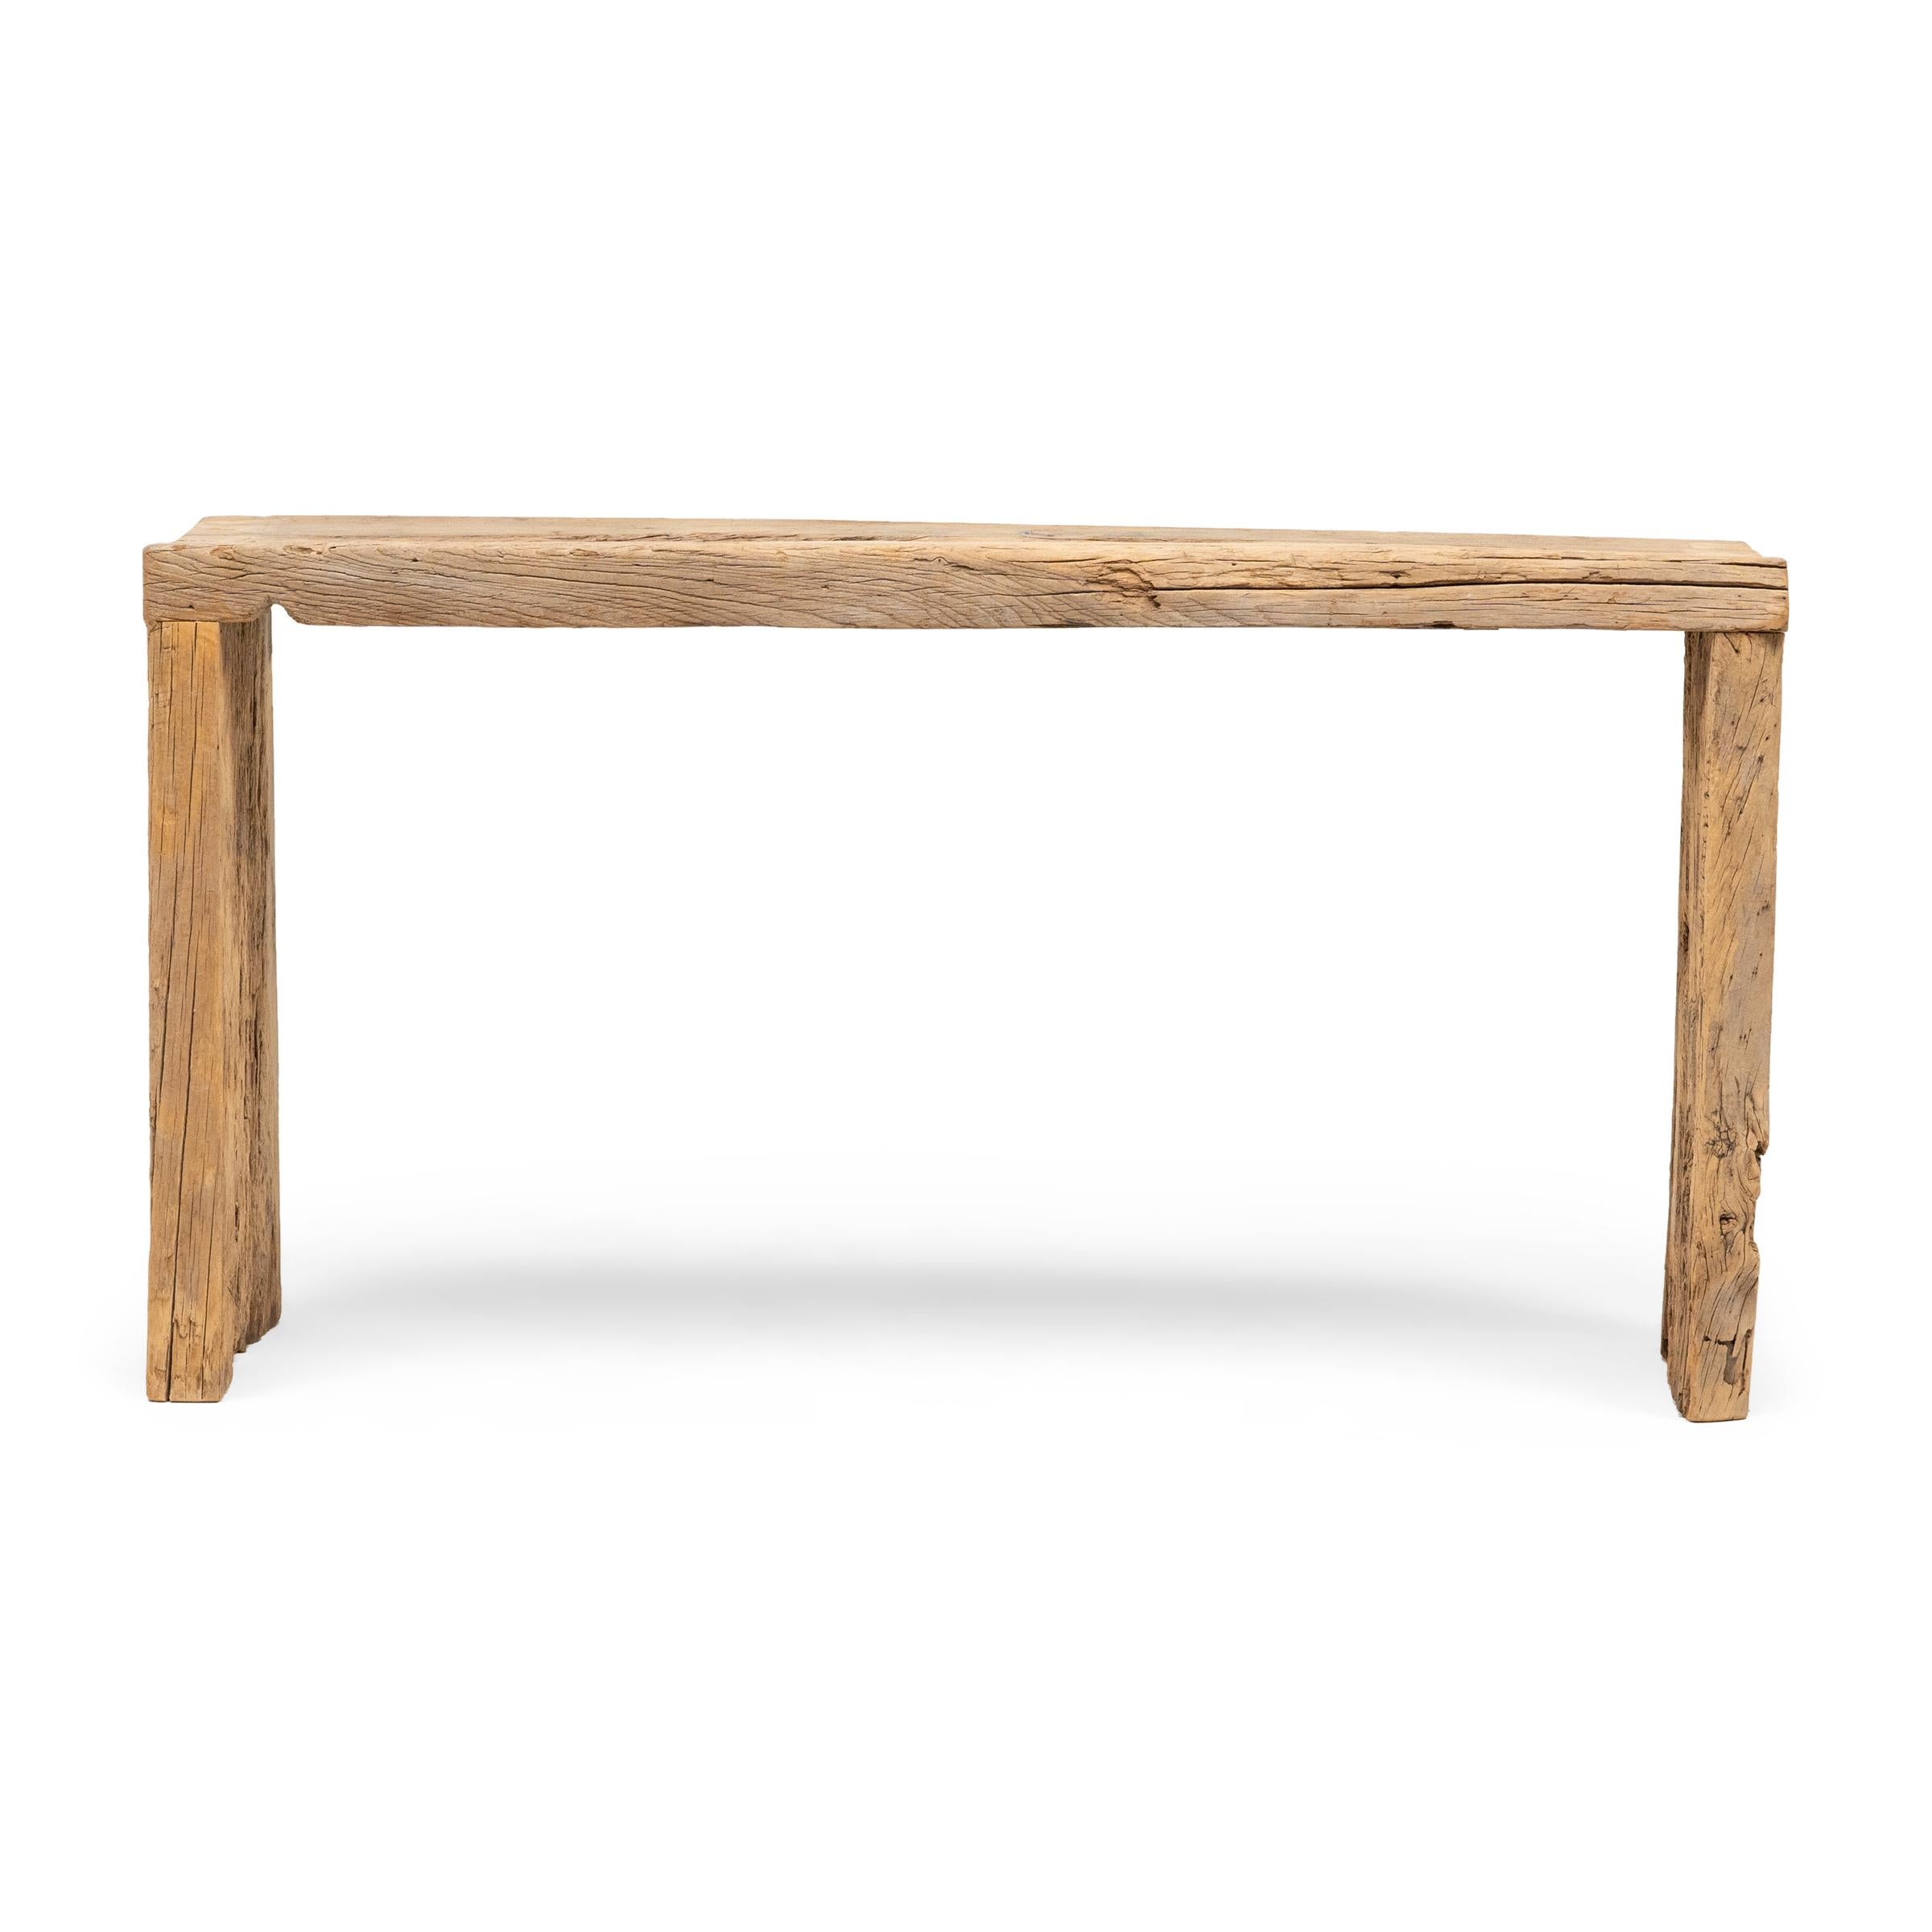 This contemporary console table is a celebration of wabi-sabi style. Crafted of wood reclaimed from Qing-dynasty architecture, the table has a minimalist waterfall design with dovetailed corners that recreate traditional joinery methods. The rustic